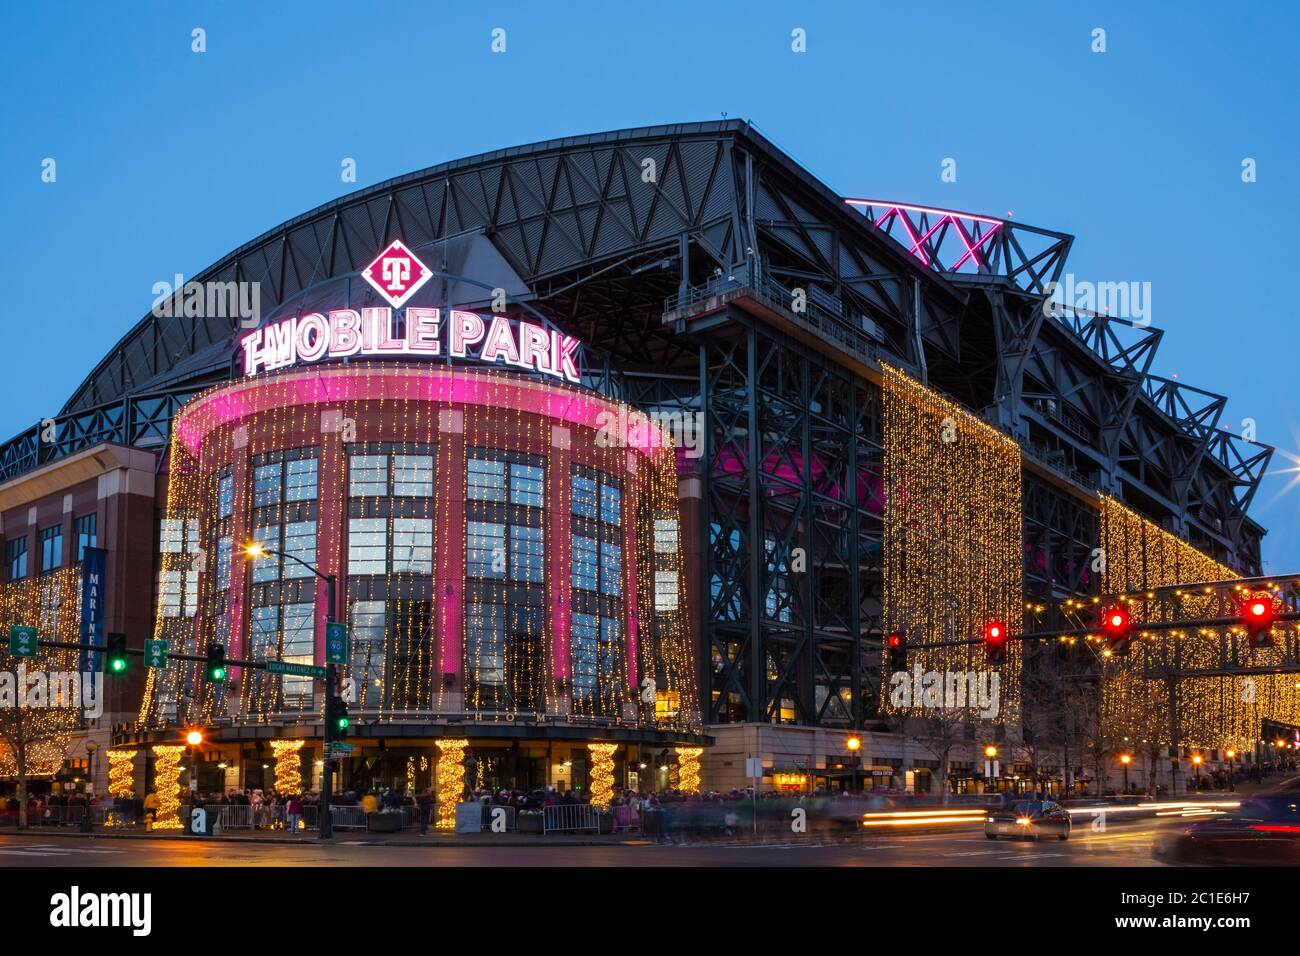 WA16778-00...WASHINGTON - T-Mobile Park, a baseball stadium, docrated for winter celebrations in Seattle's Stadium District. Stock Photo